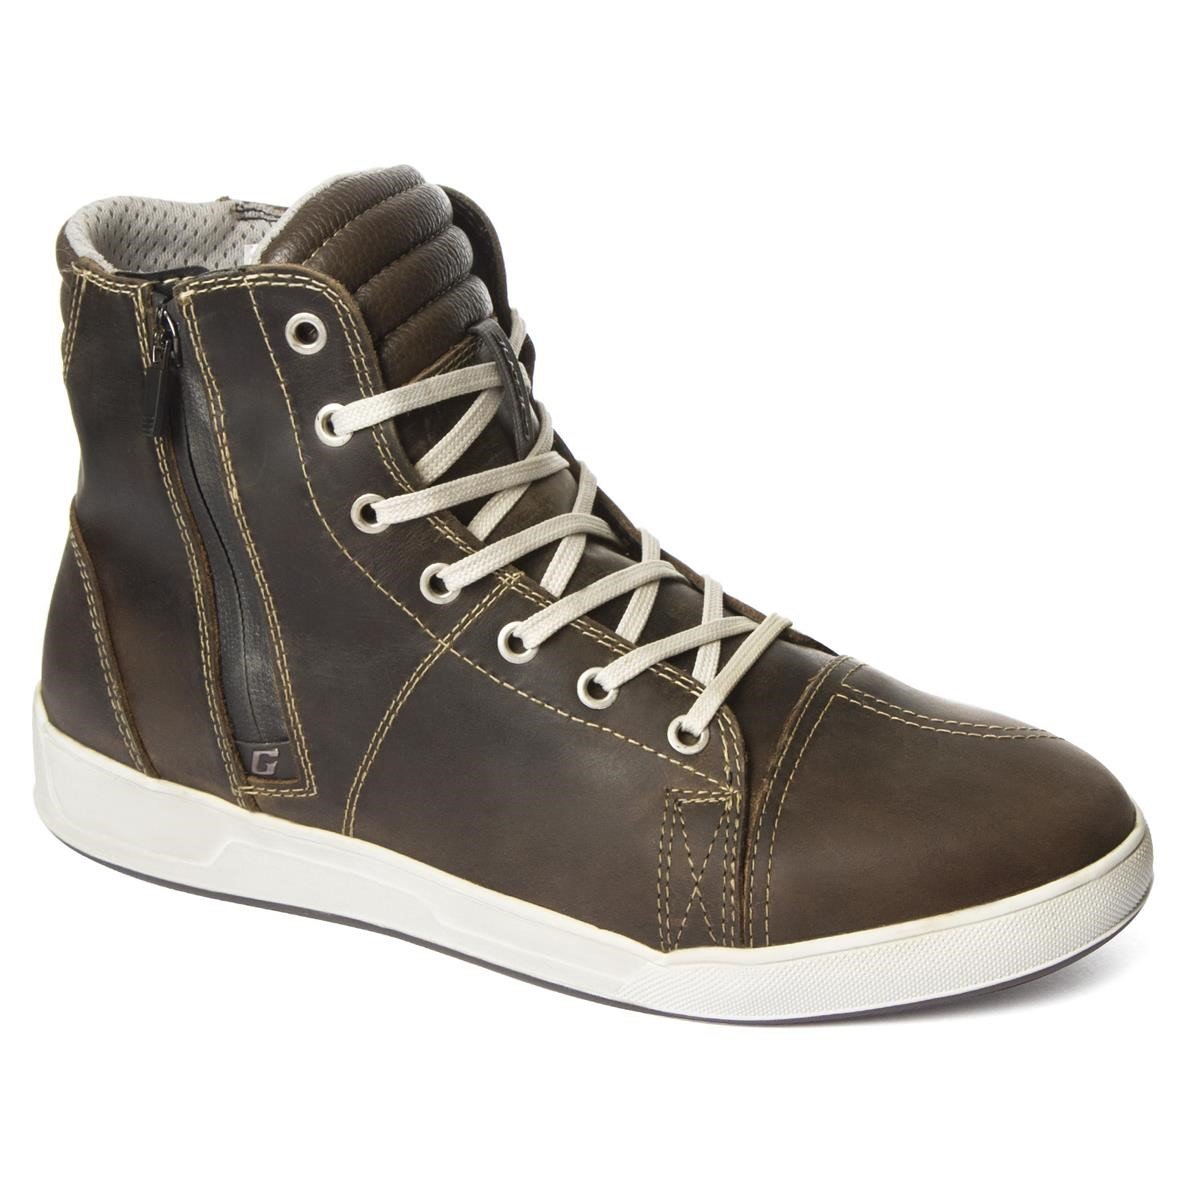 Gaerne Chaussures Voyager Oiled Drytech Brown